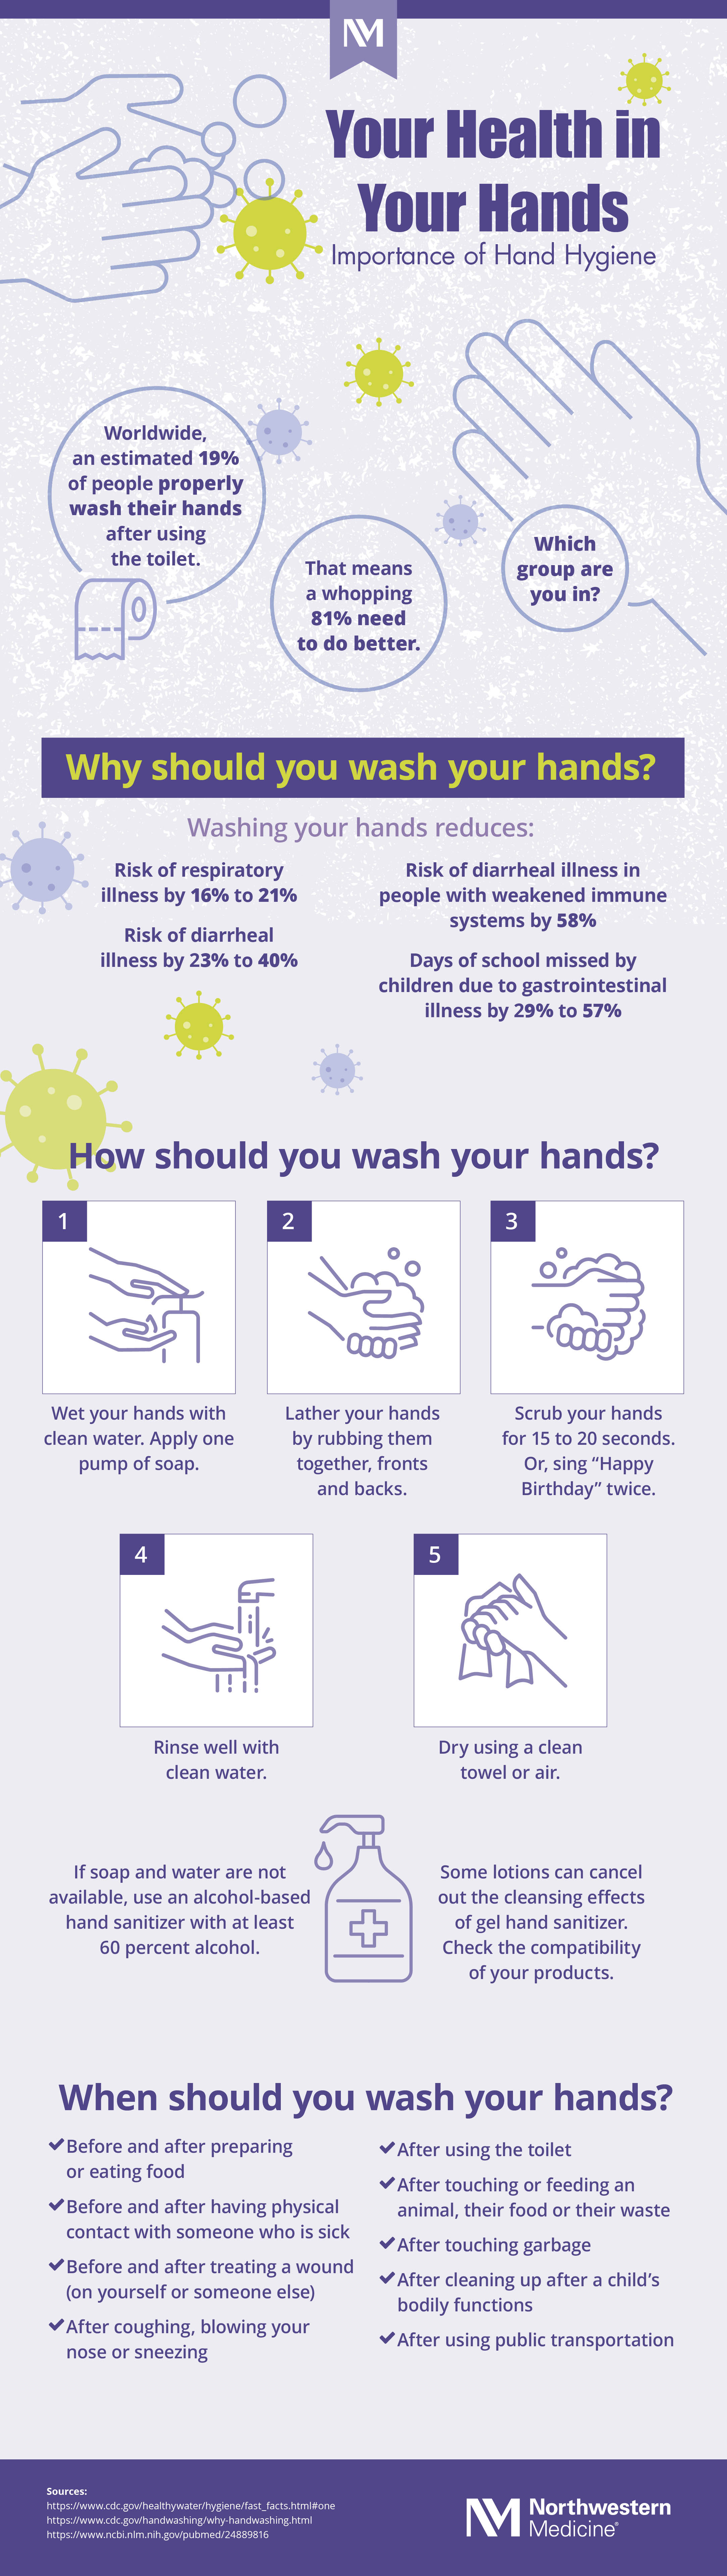 nm-your-health-in-your-hands_infographic